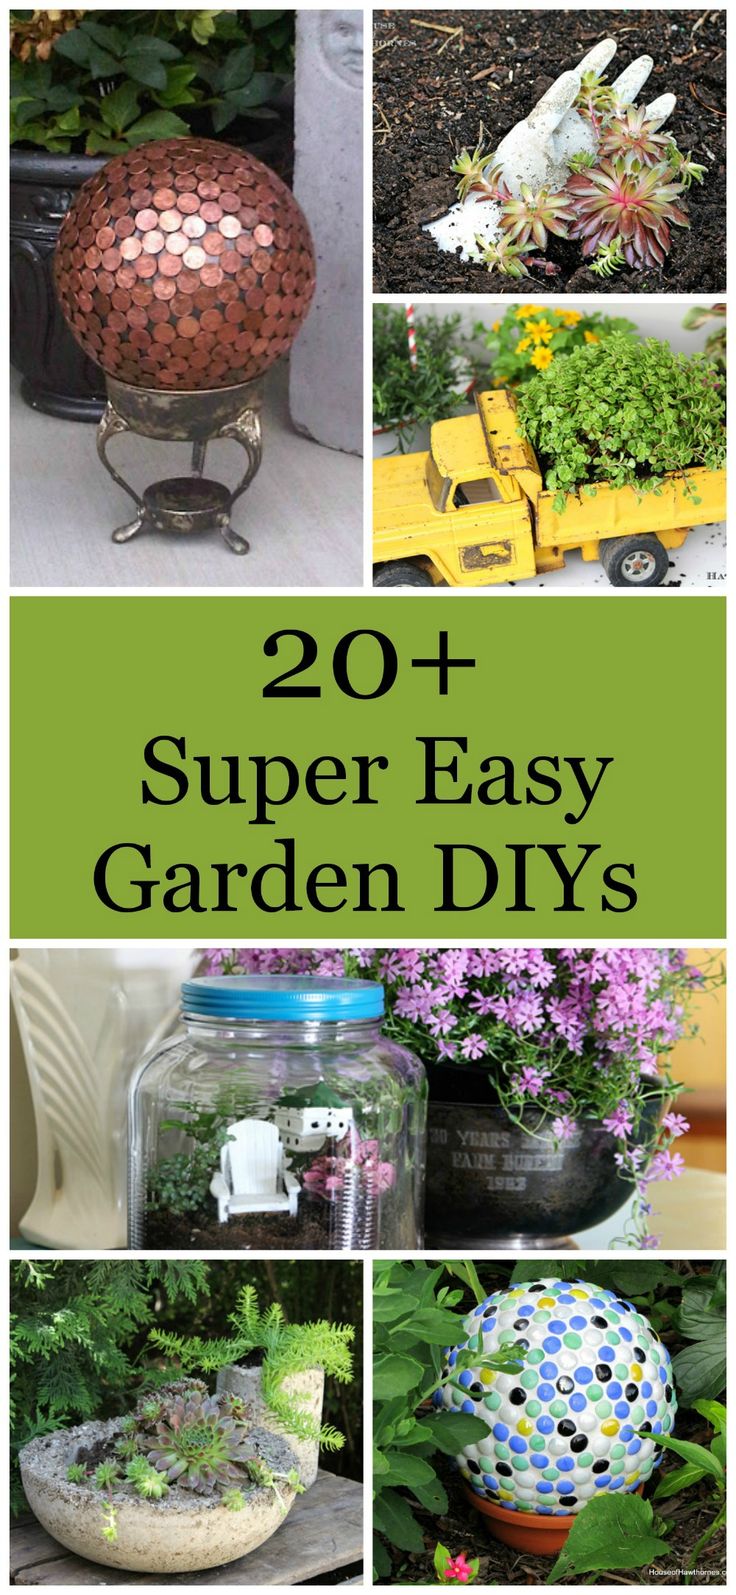 Over 20 DIY gardening projects that are super easy and fun to make.